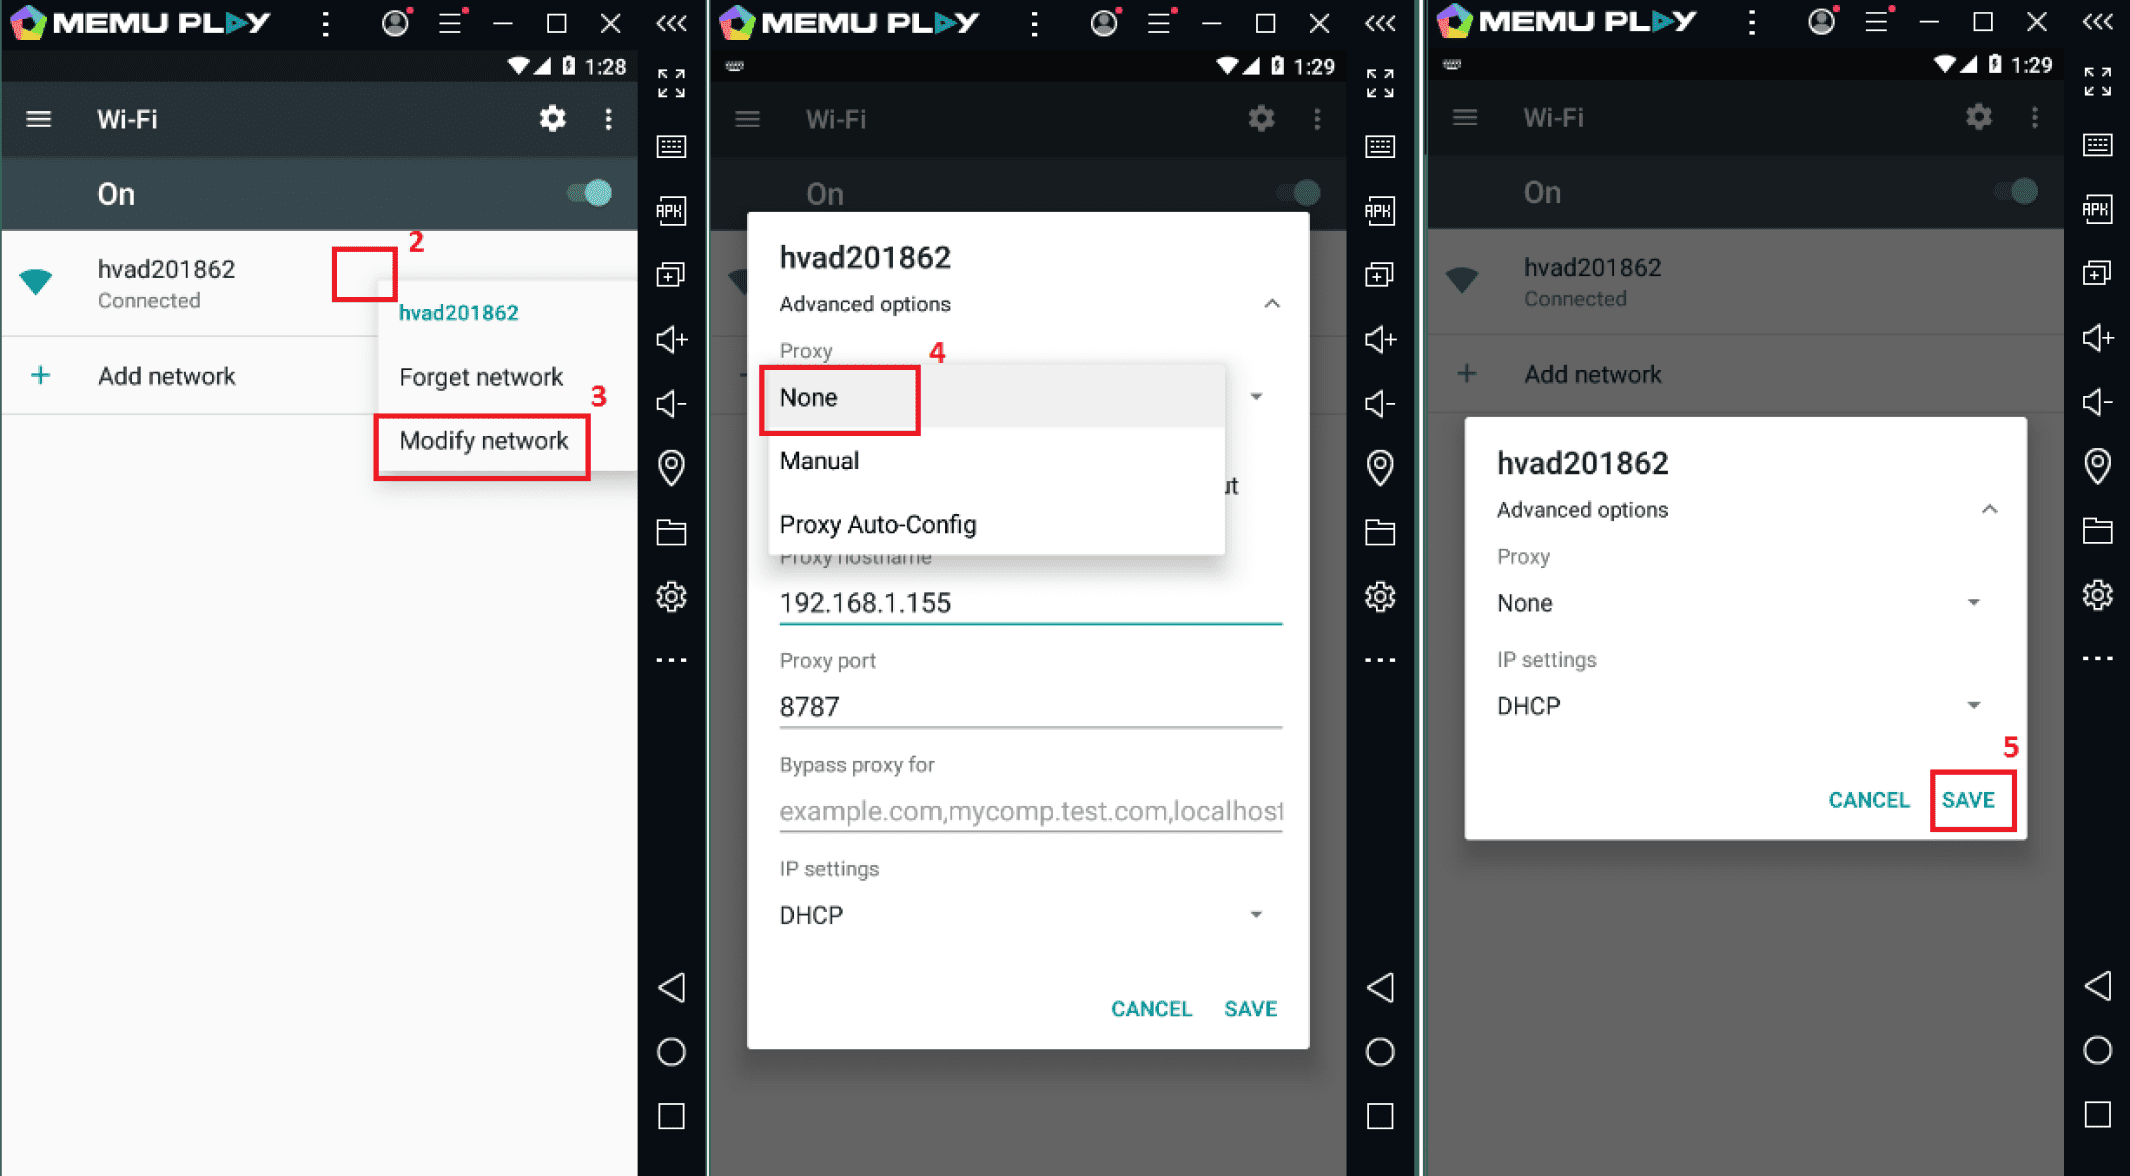 Disable proxy on your mobile device